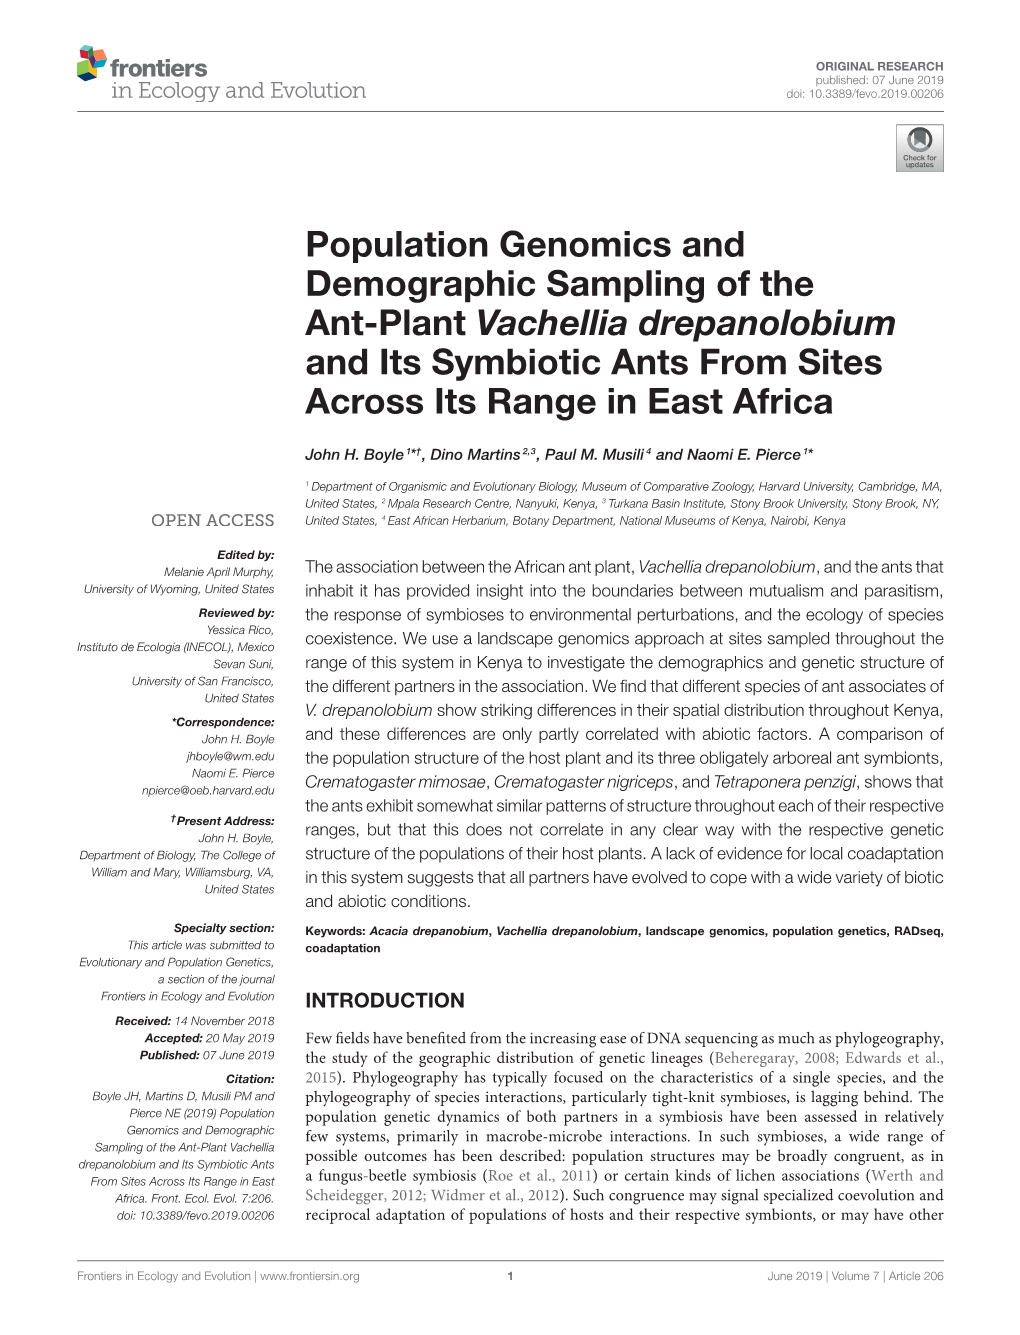 Population Genomics and Demographic Sampling of the Ant-Plant Vachellia Drepanolobium and Its Symbiotic Ants from Sites Across Its Range in East Africa